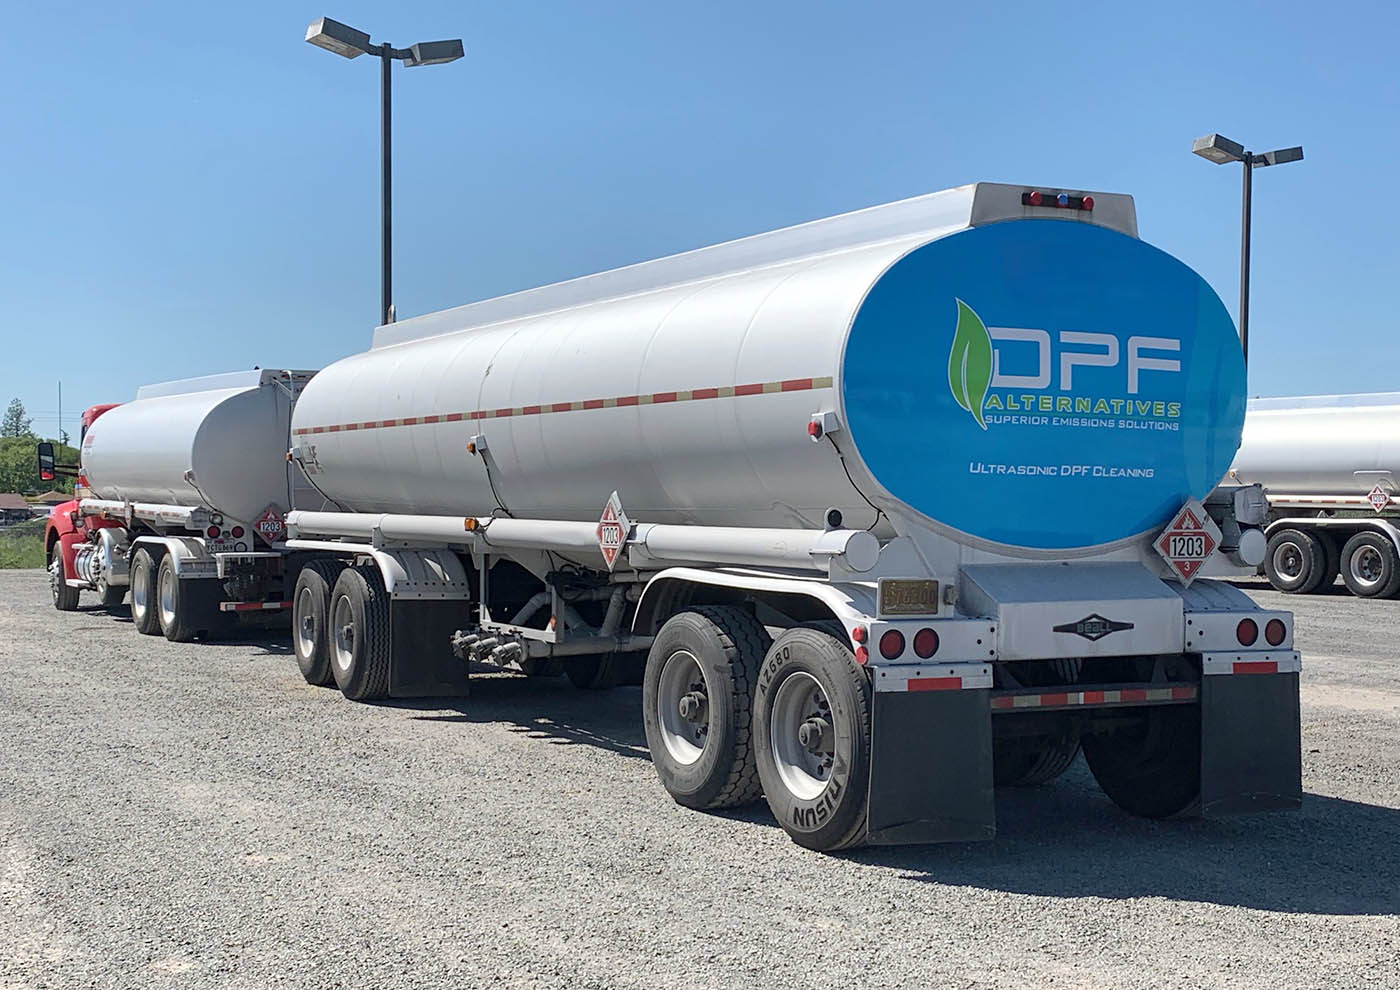 Back of a clean, large, reflective semi truck rig, contact DPF Alternatives for a DPF cleaning in Ontario / Malheur County, OR.